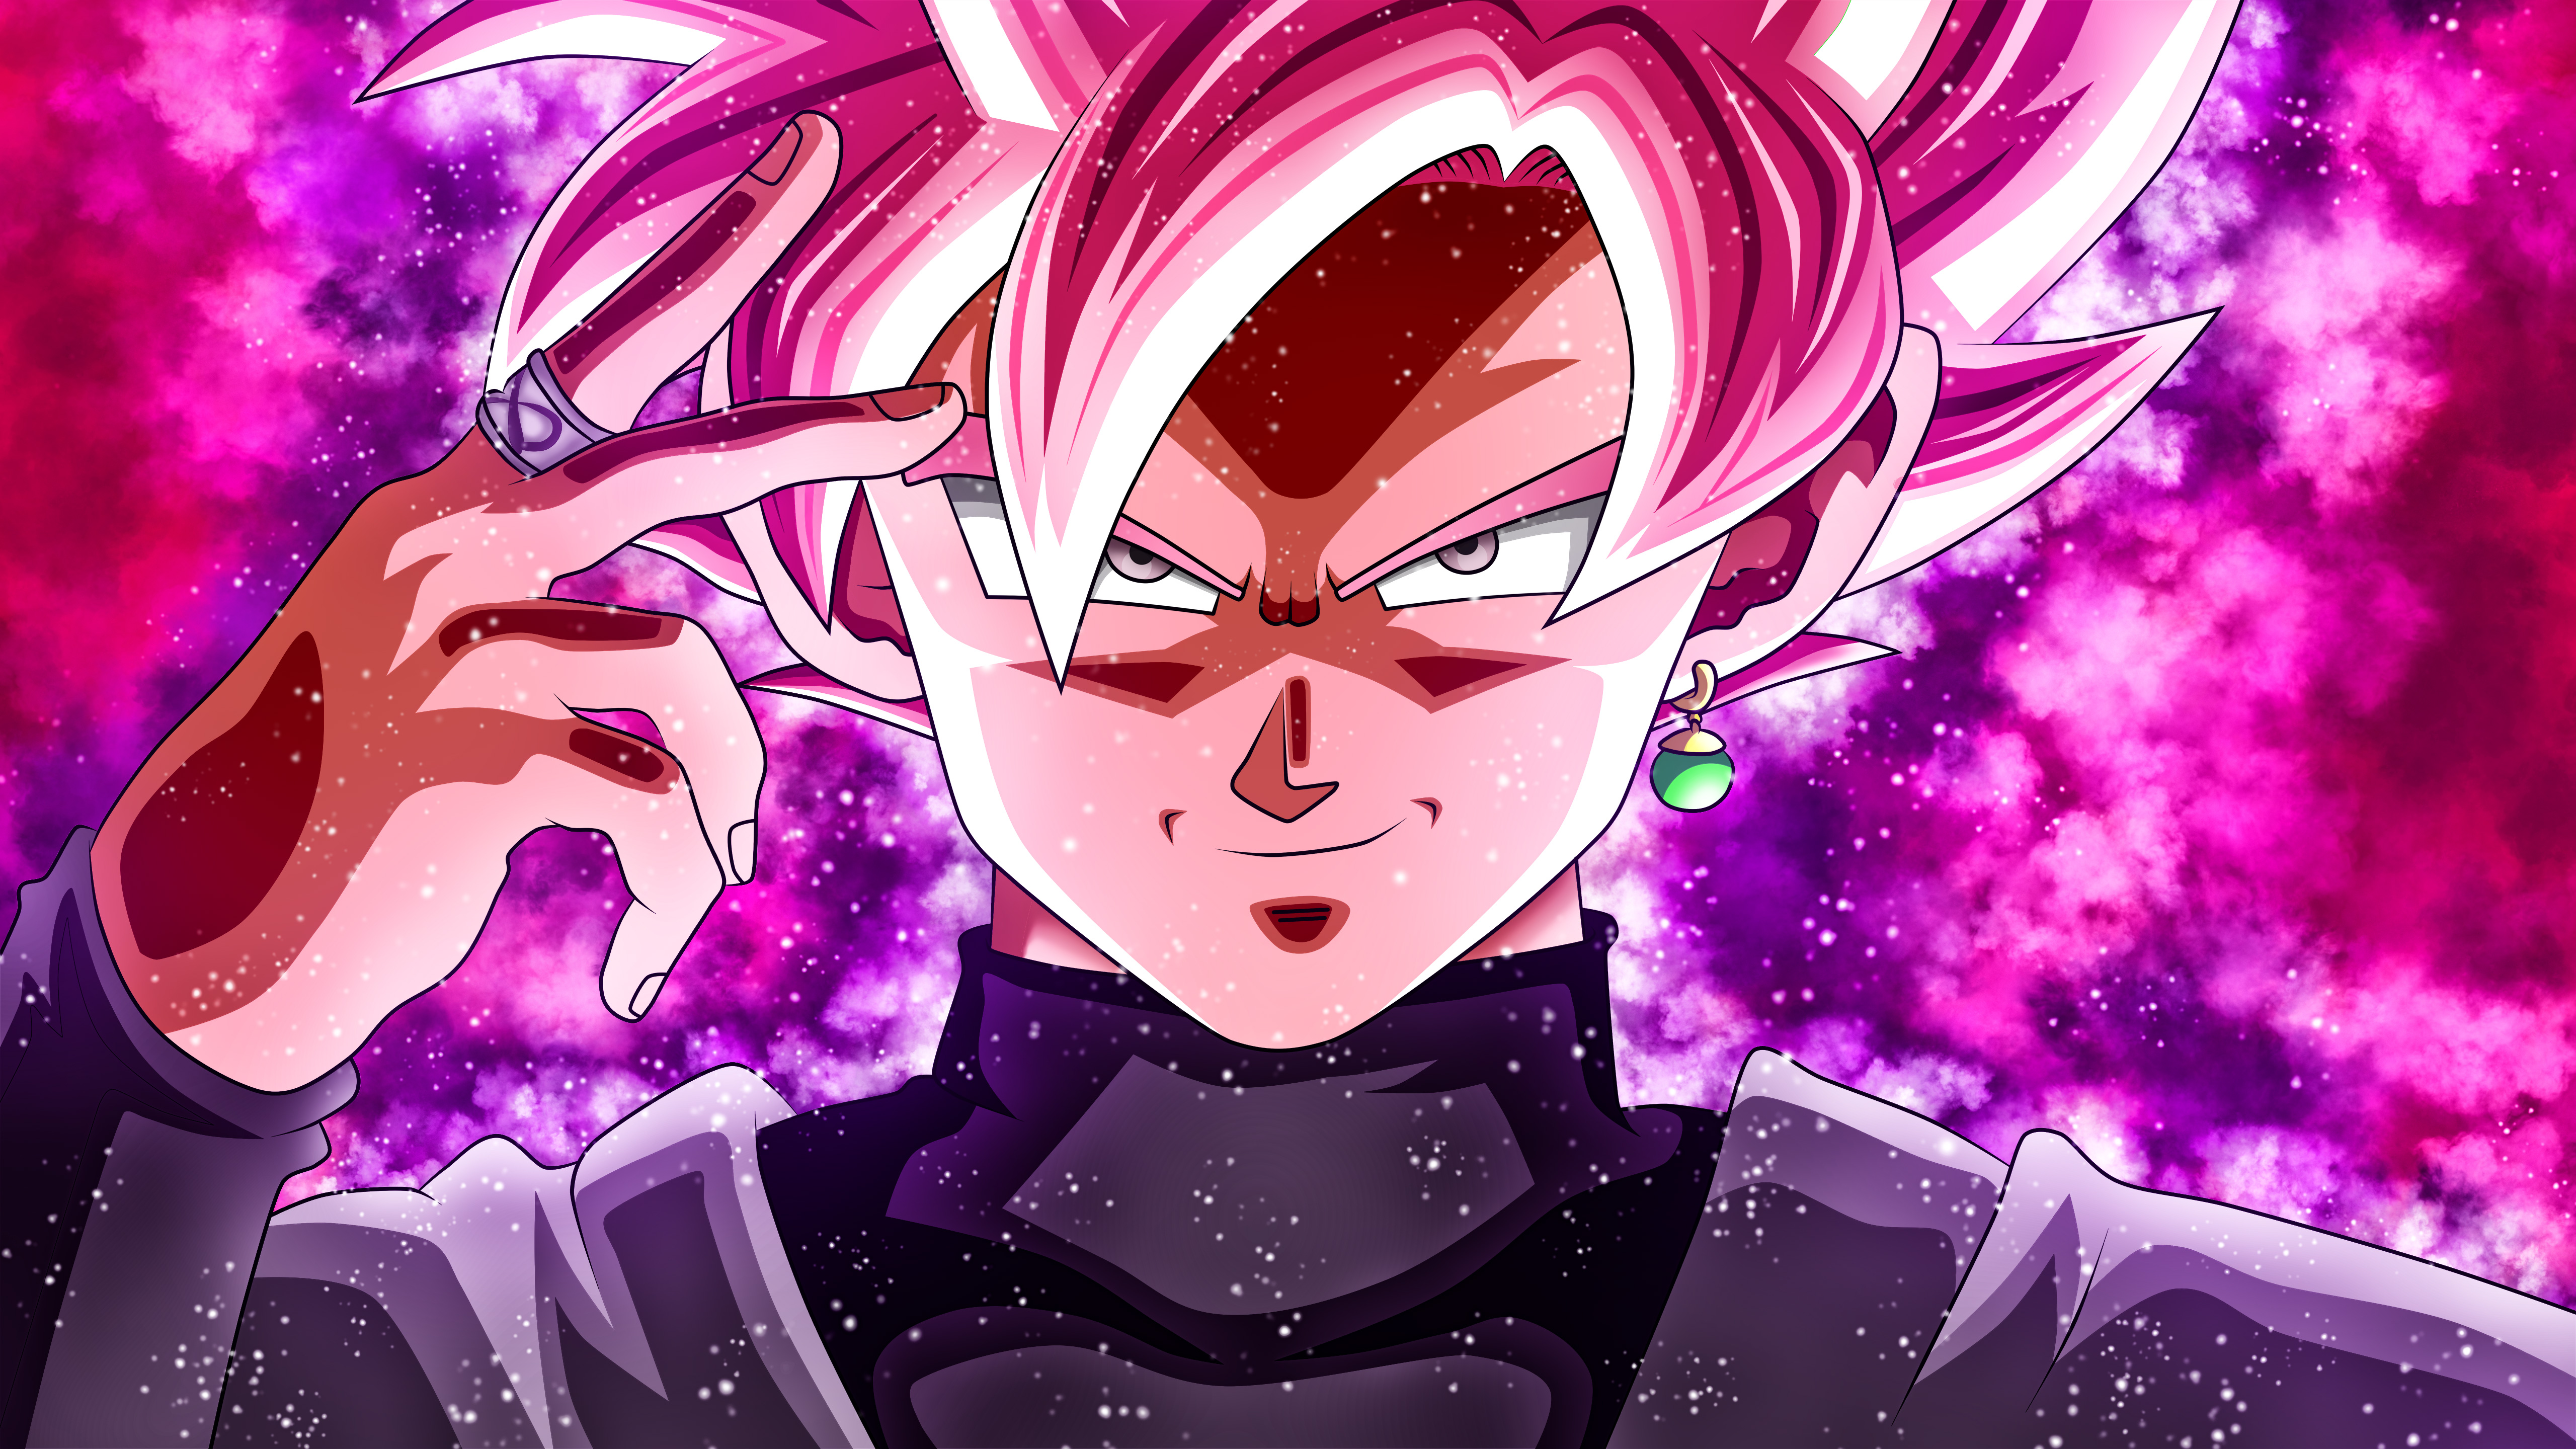 Black Goku Dragon Ball Super Hd Anime 4k Wallpapers Images Backgrounds Photos And Pictures 7848